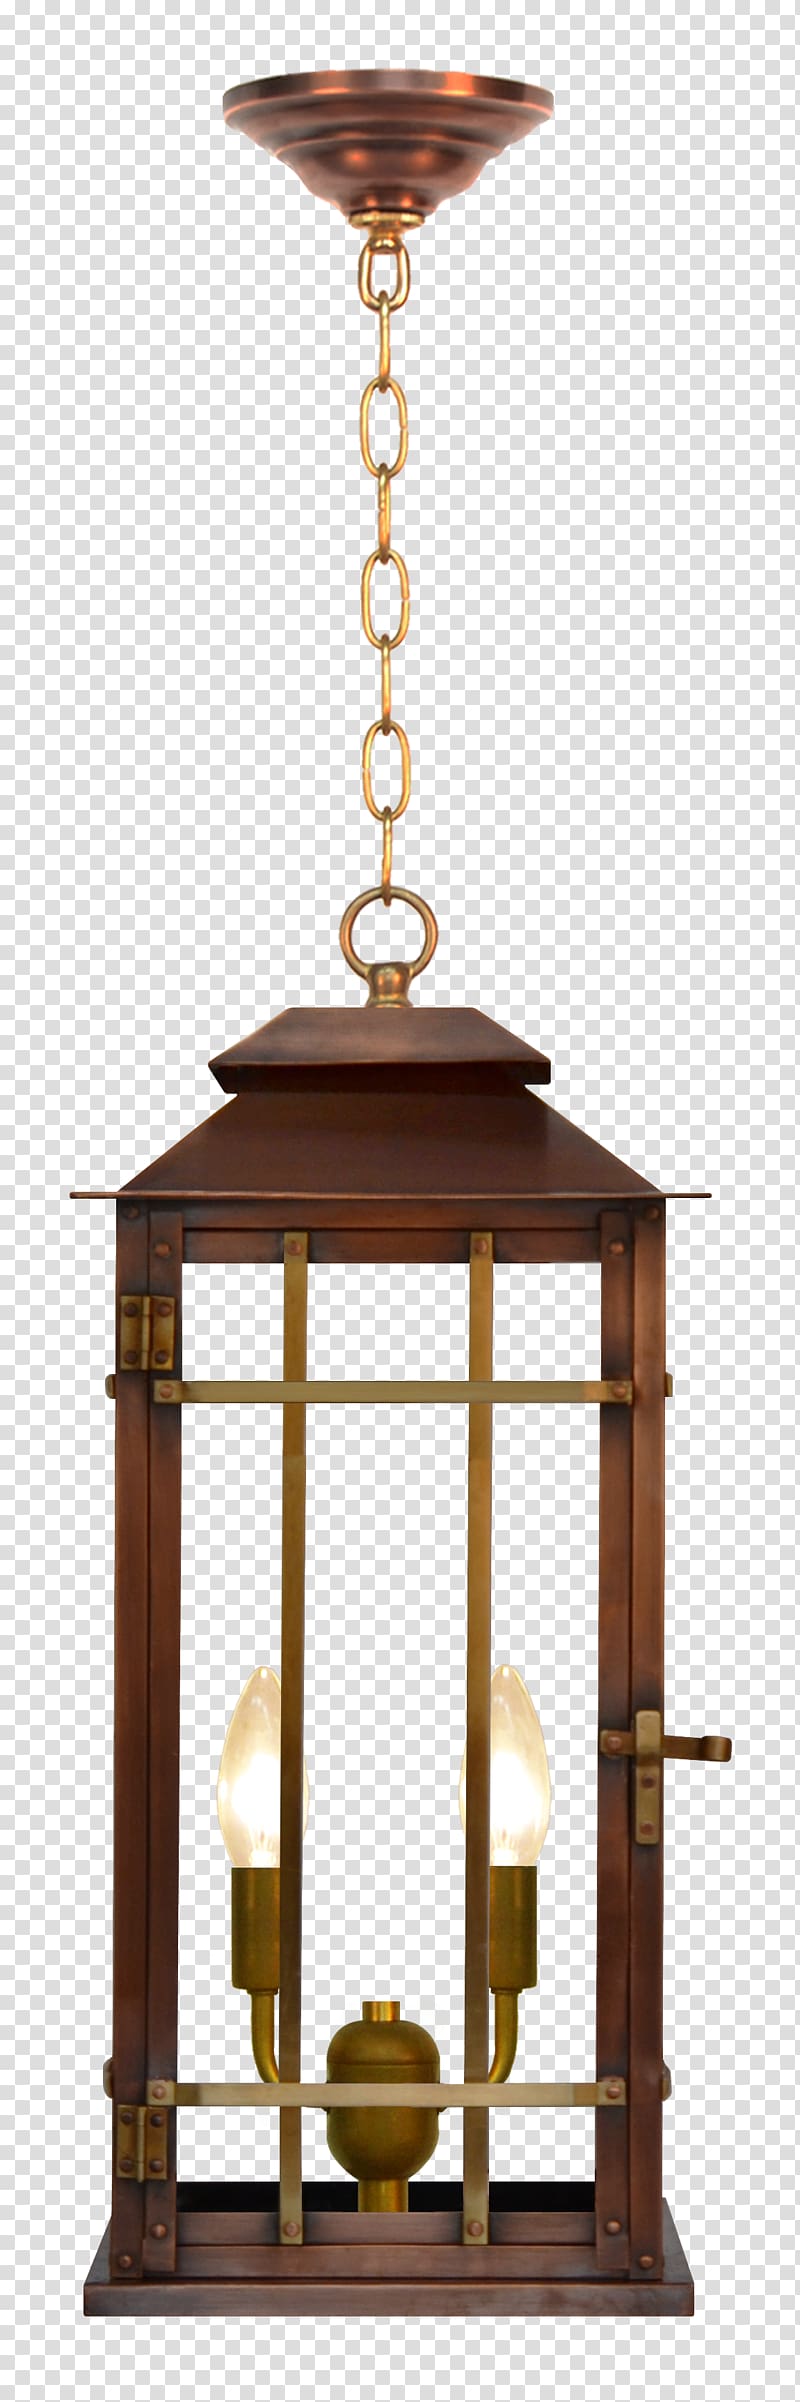 Gas lighting Lantern Light fixture, table ship anchor chains transparent background PNG clipart